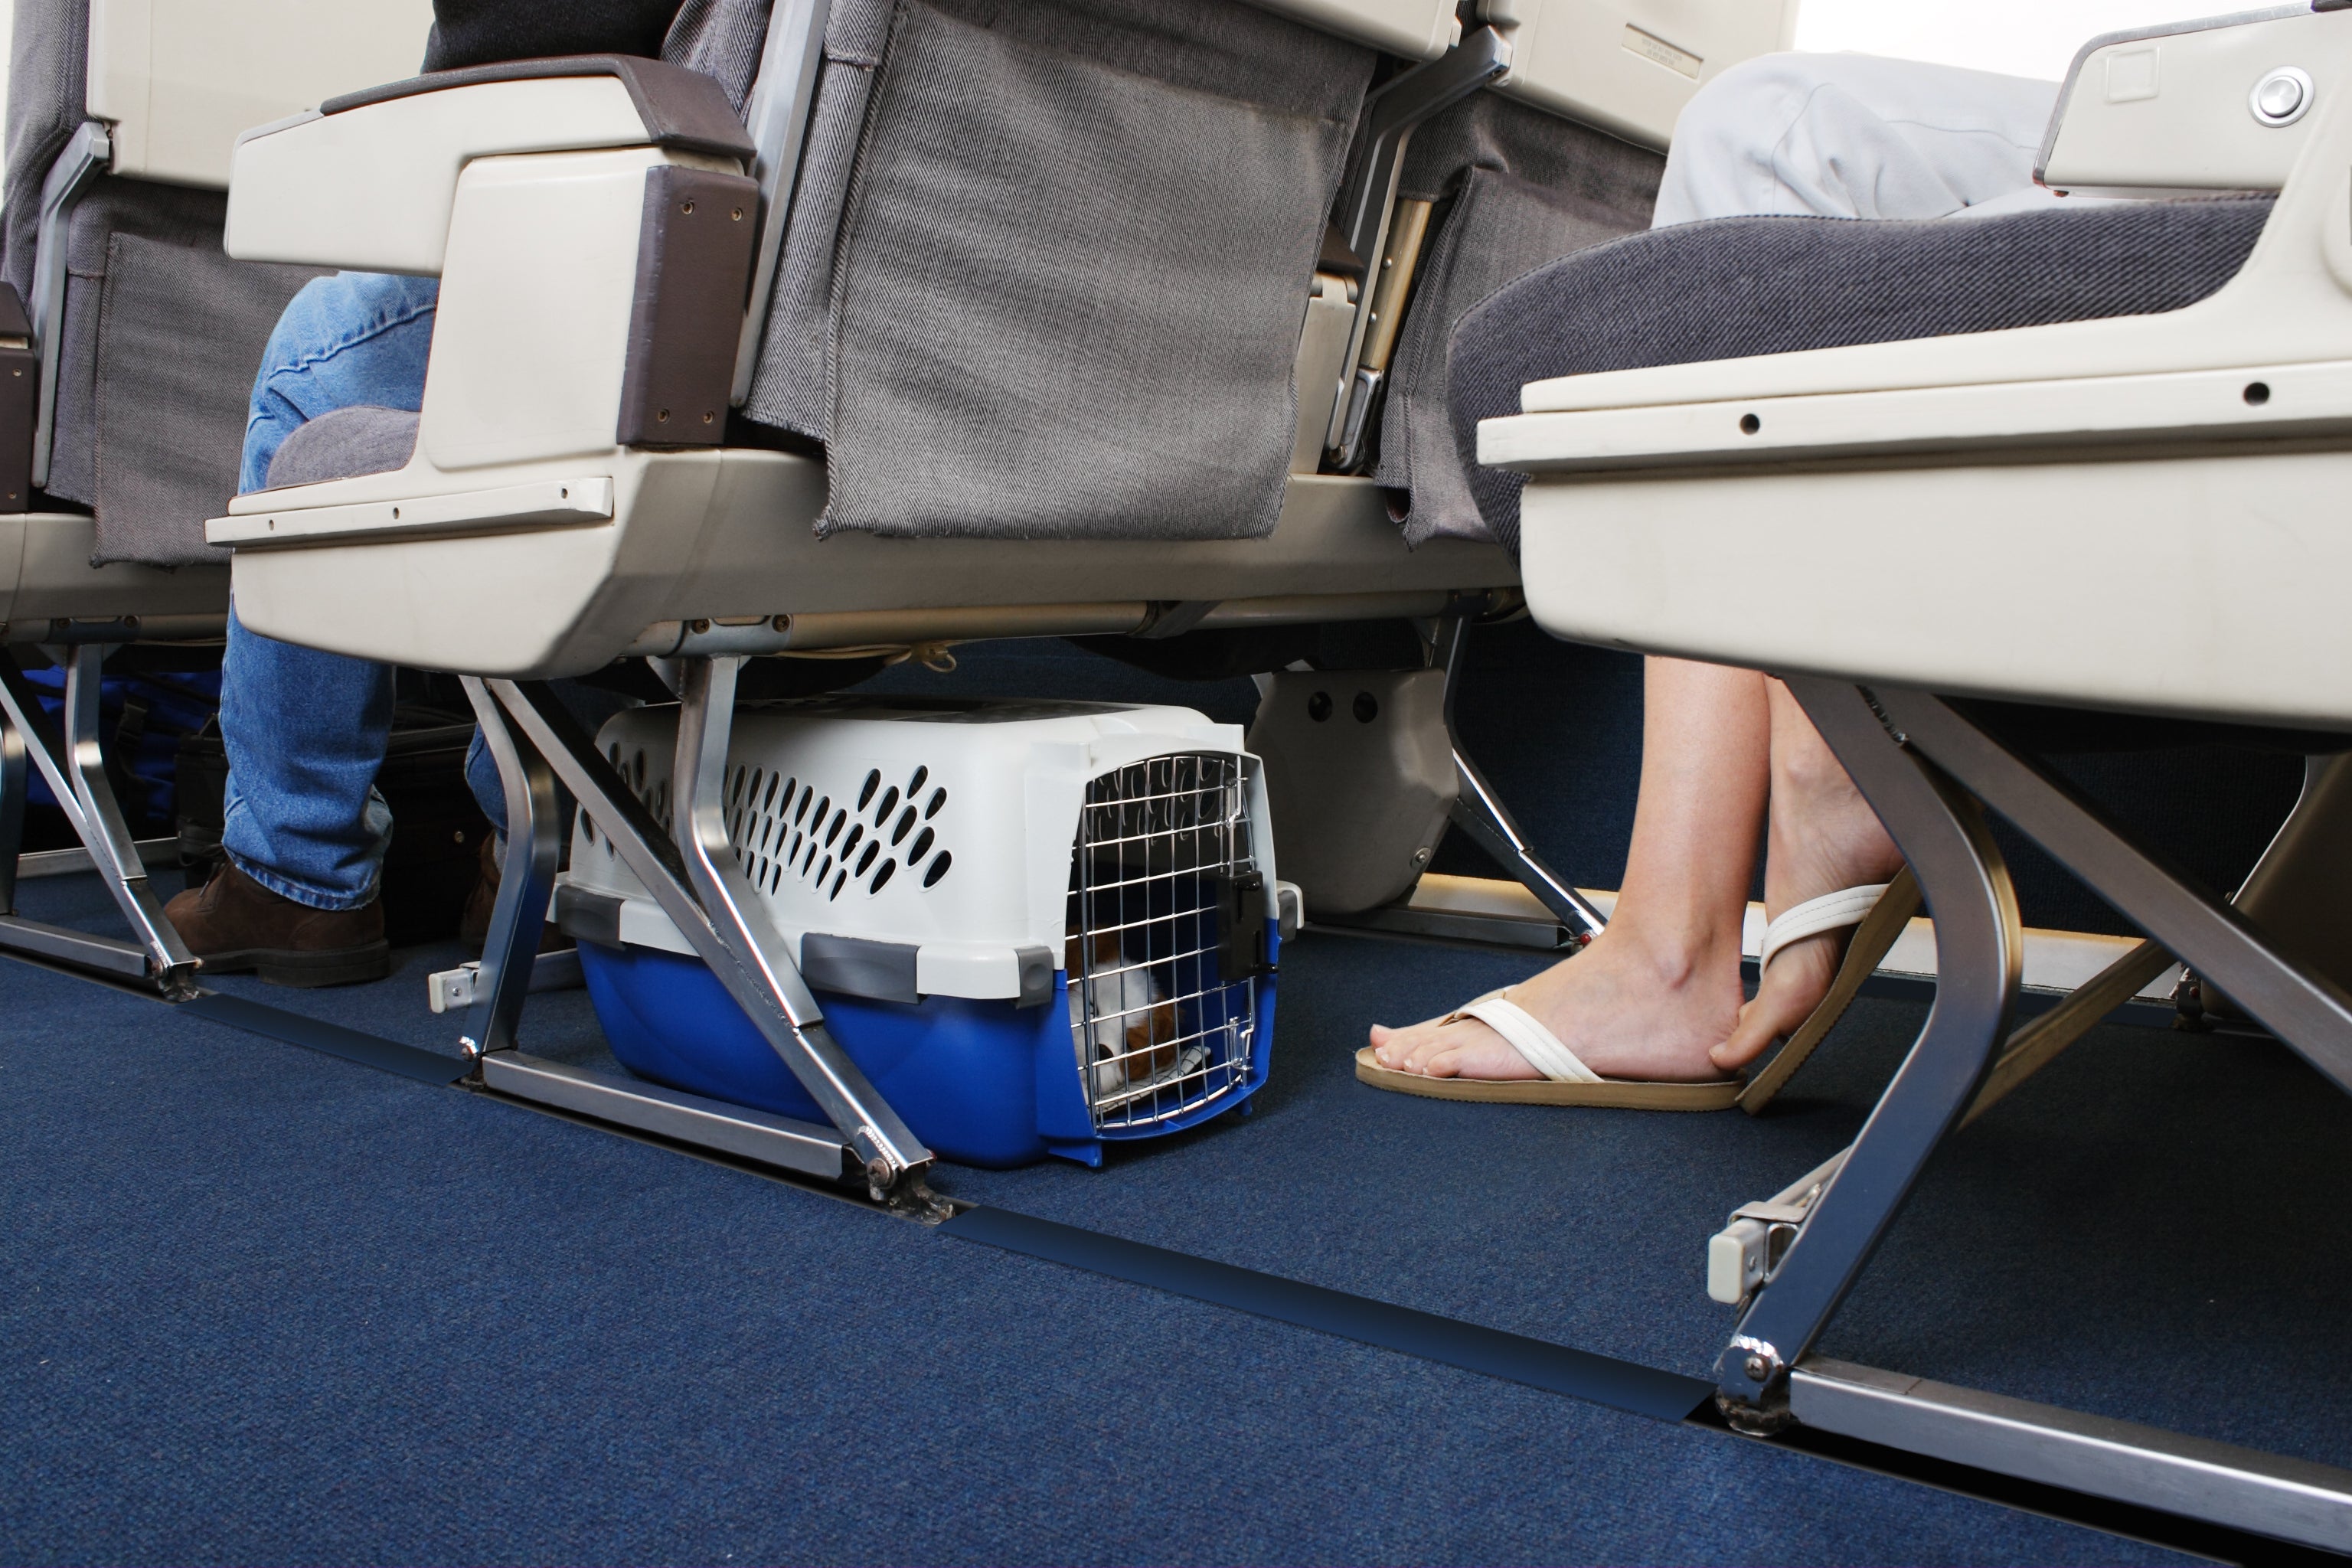 Alaska Airlines pet policy says ‘the pet must stay in its carrier’